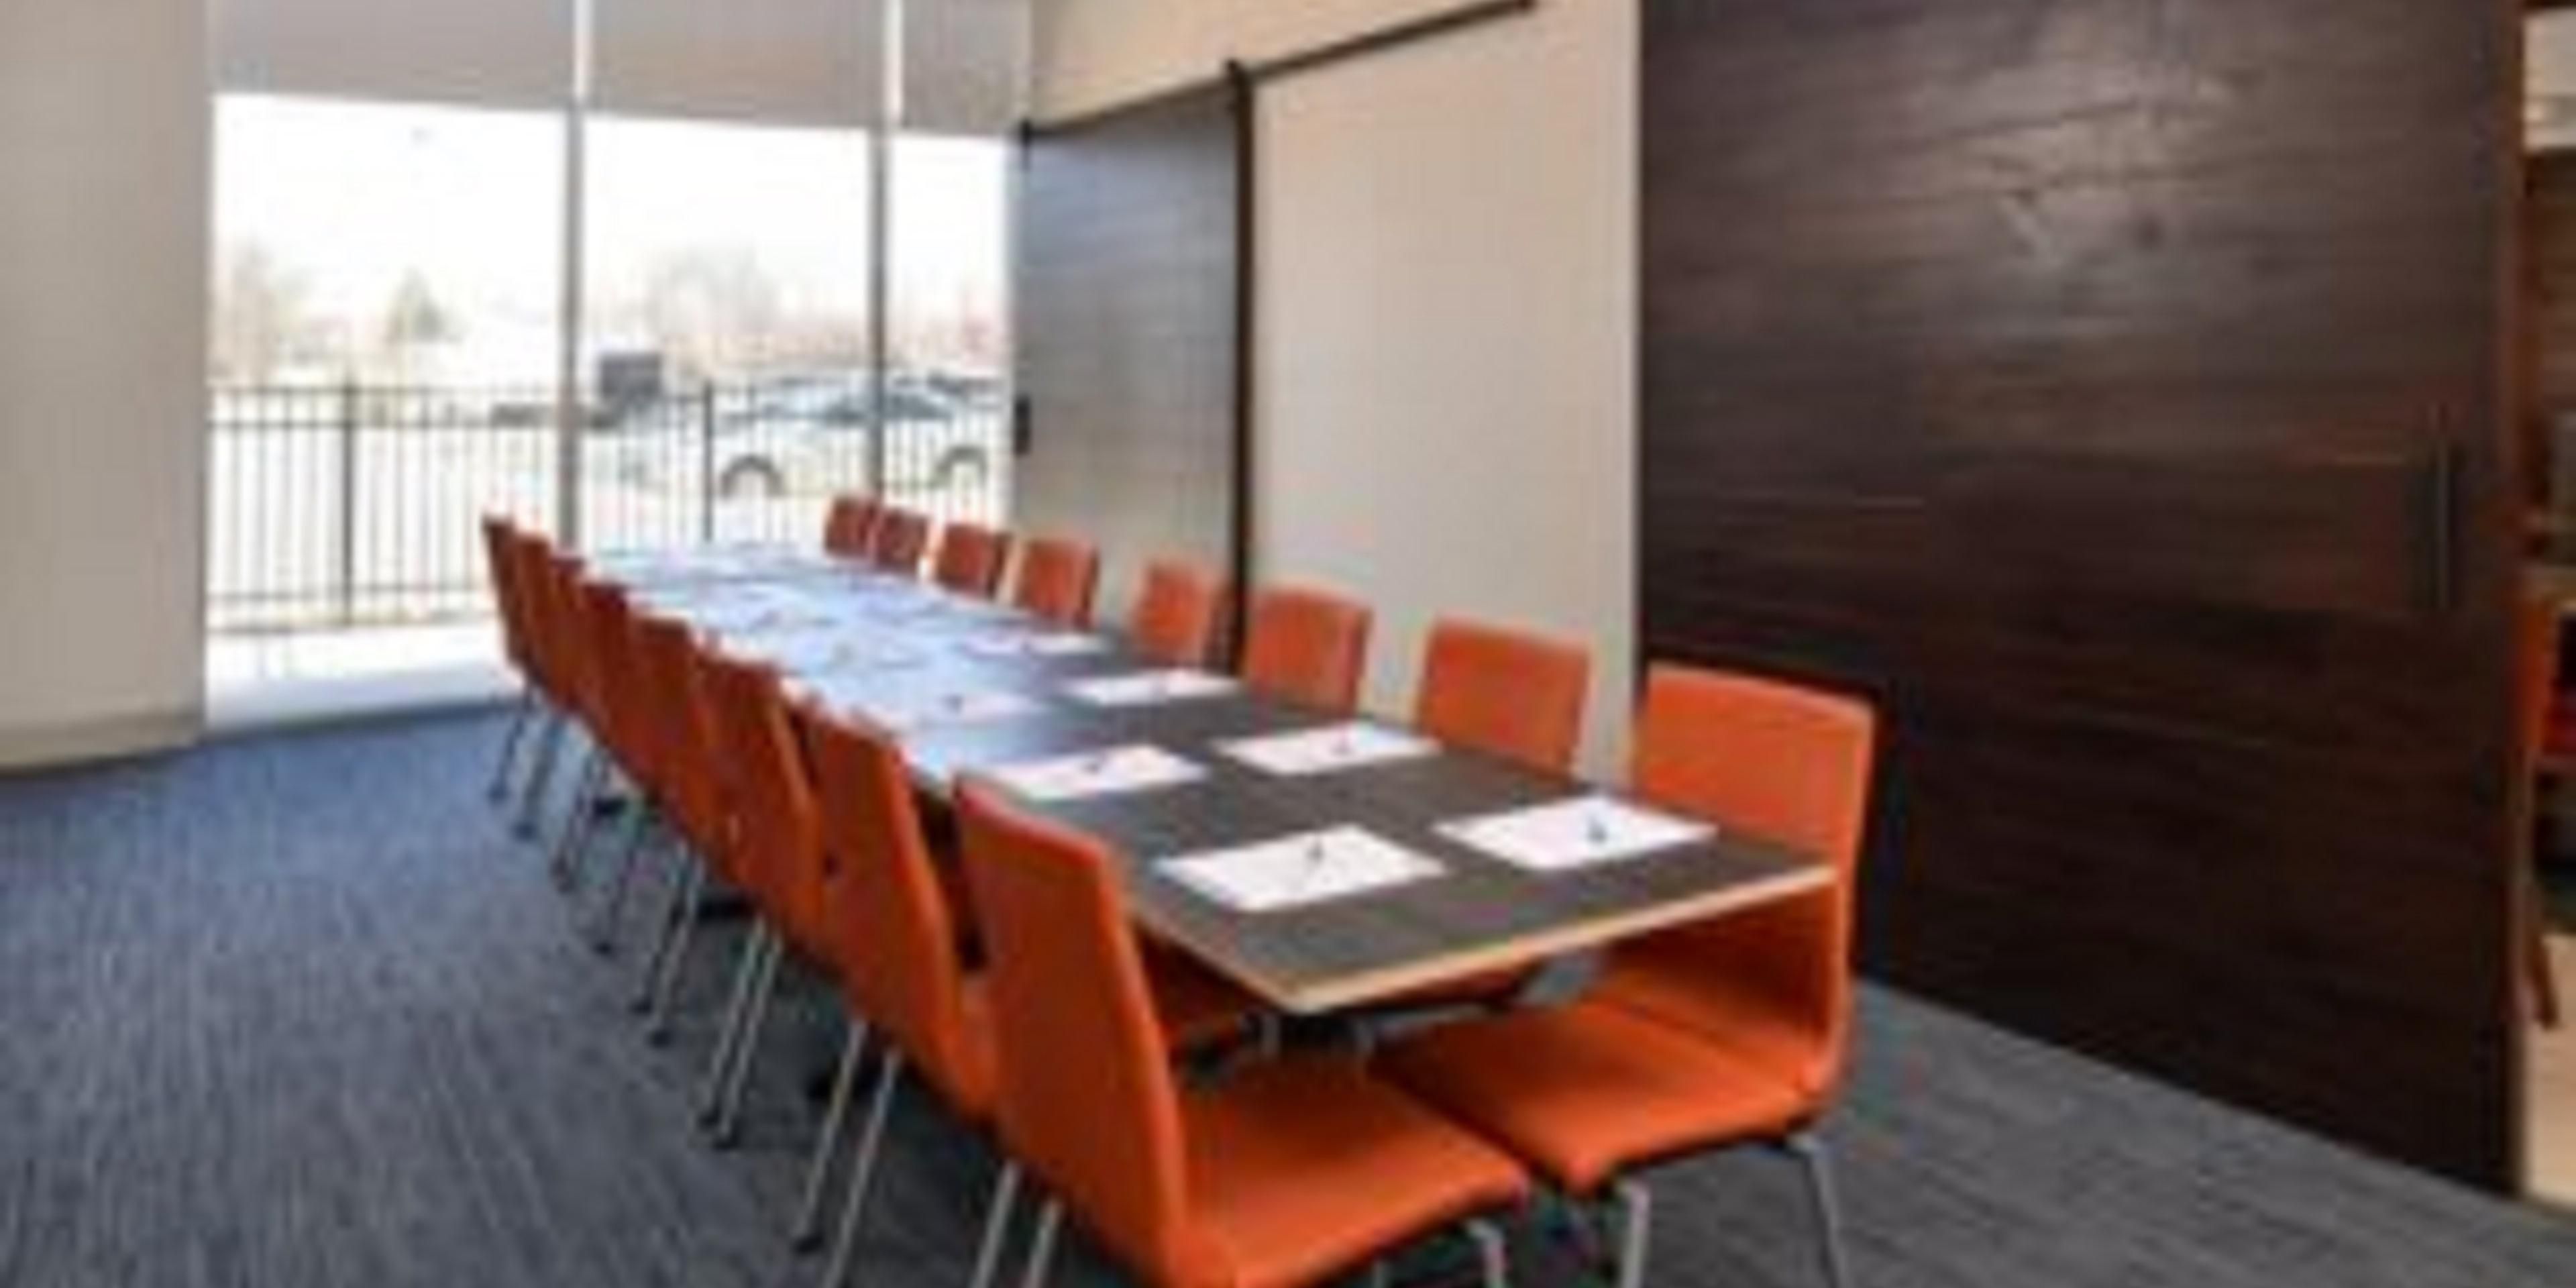 We offer 552 square feet of meeting space for your meeting needs.